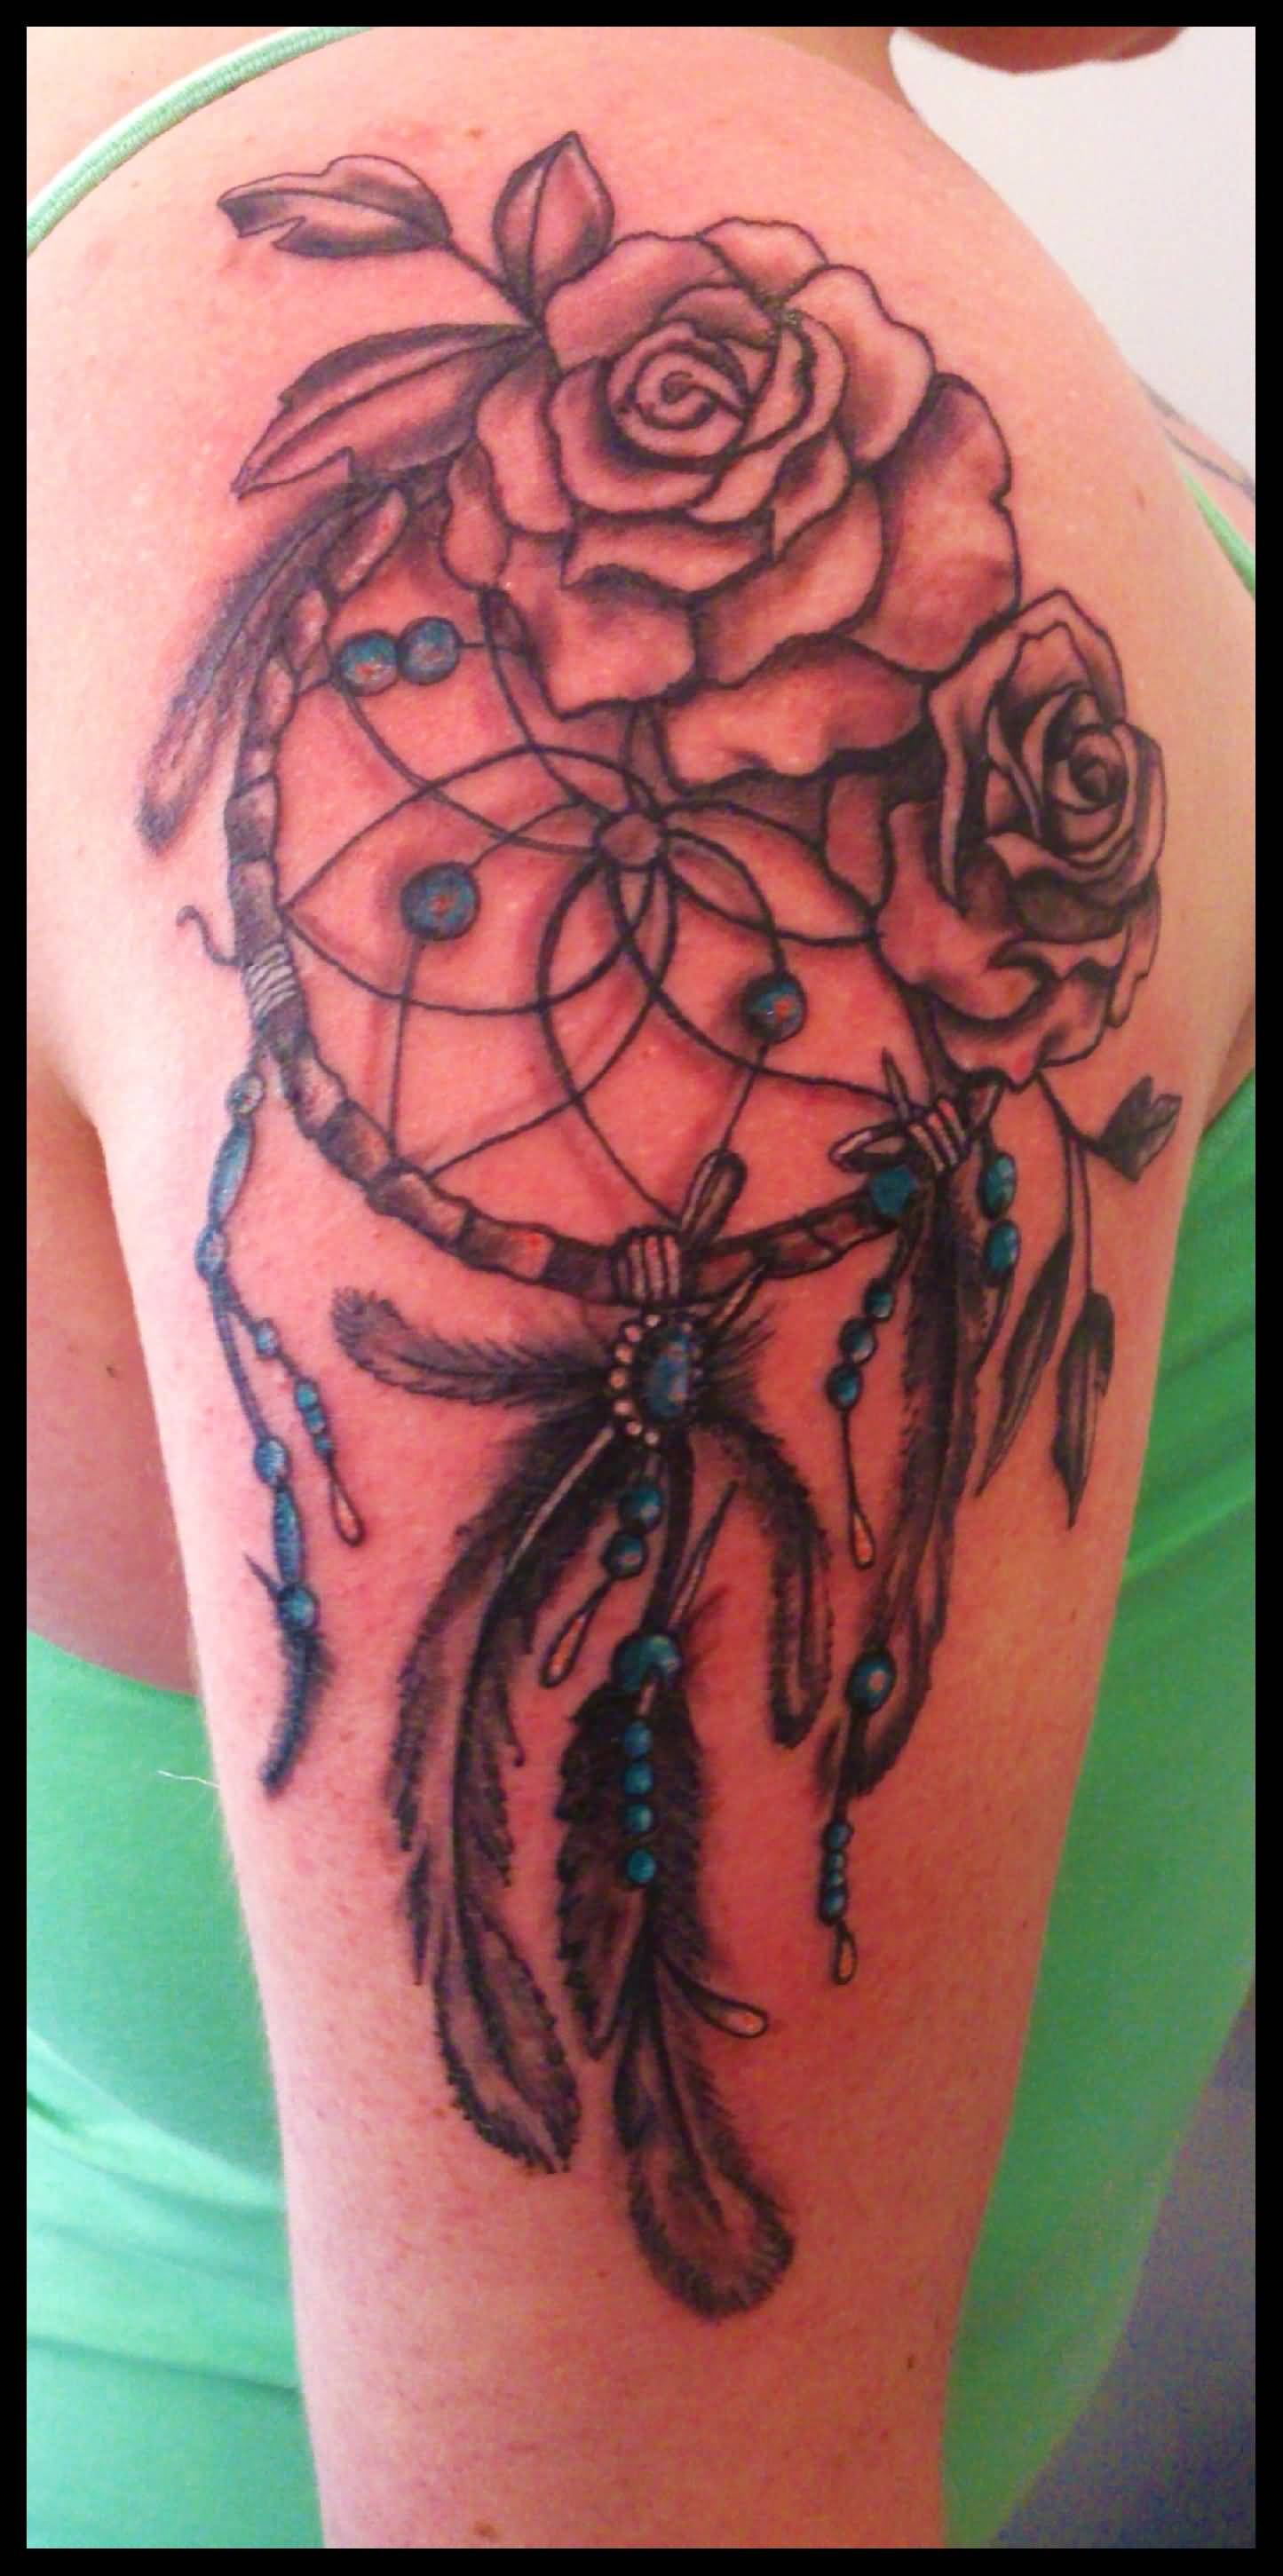 Grey Rose Flowers And Dreamcatcher Tattoo On Girl Right Shoulder